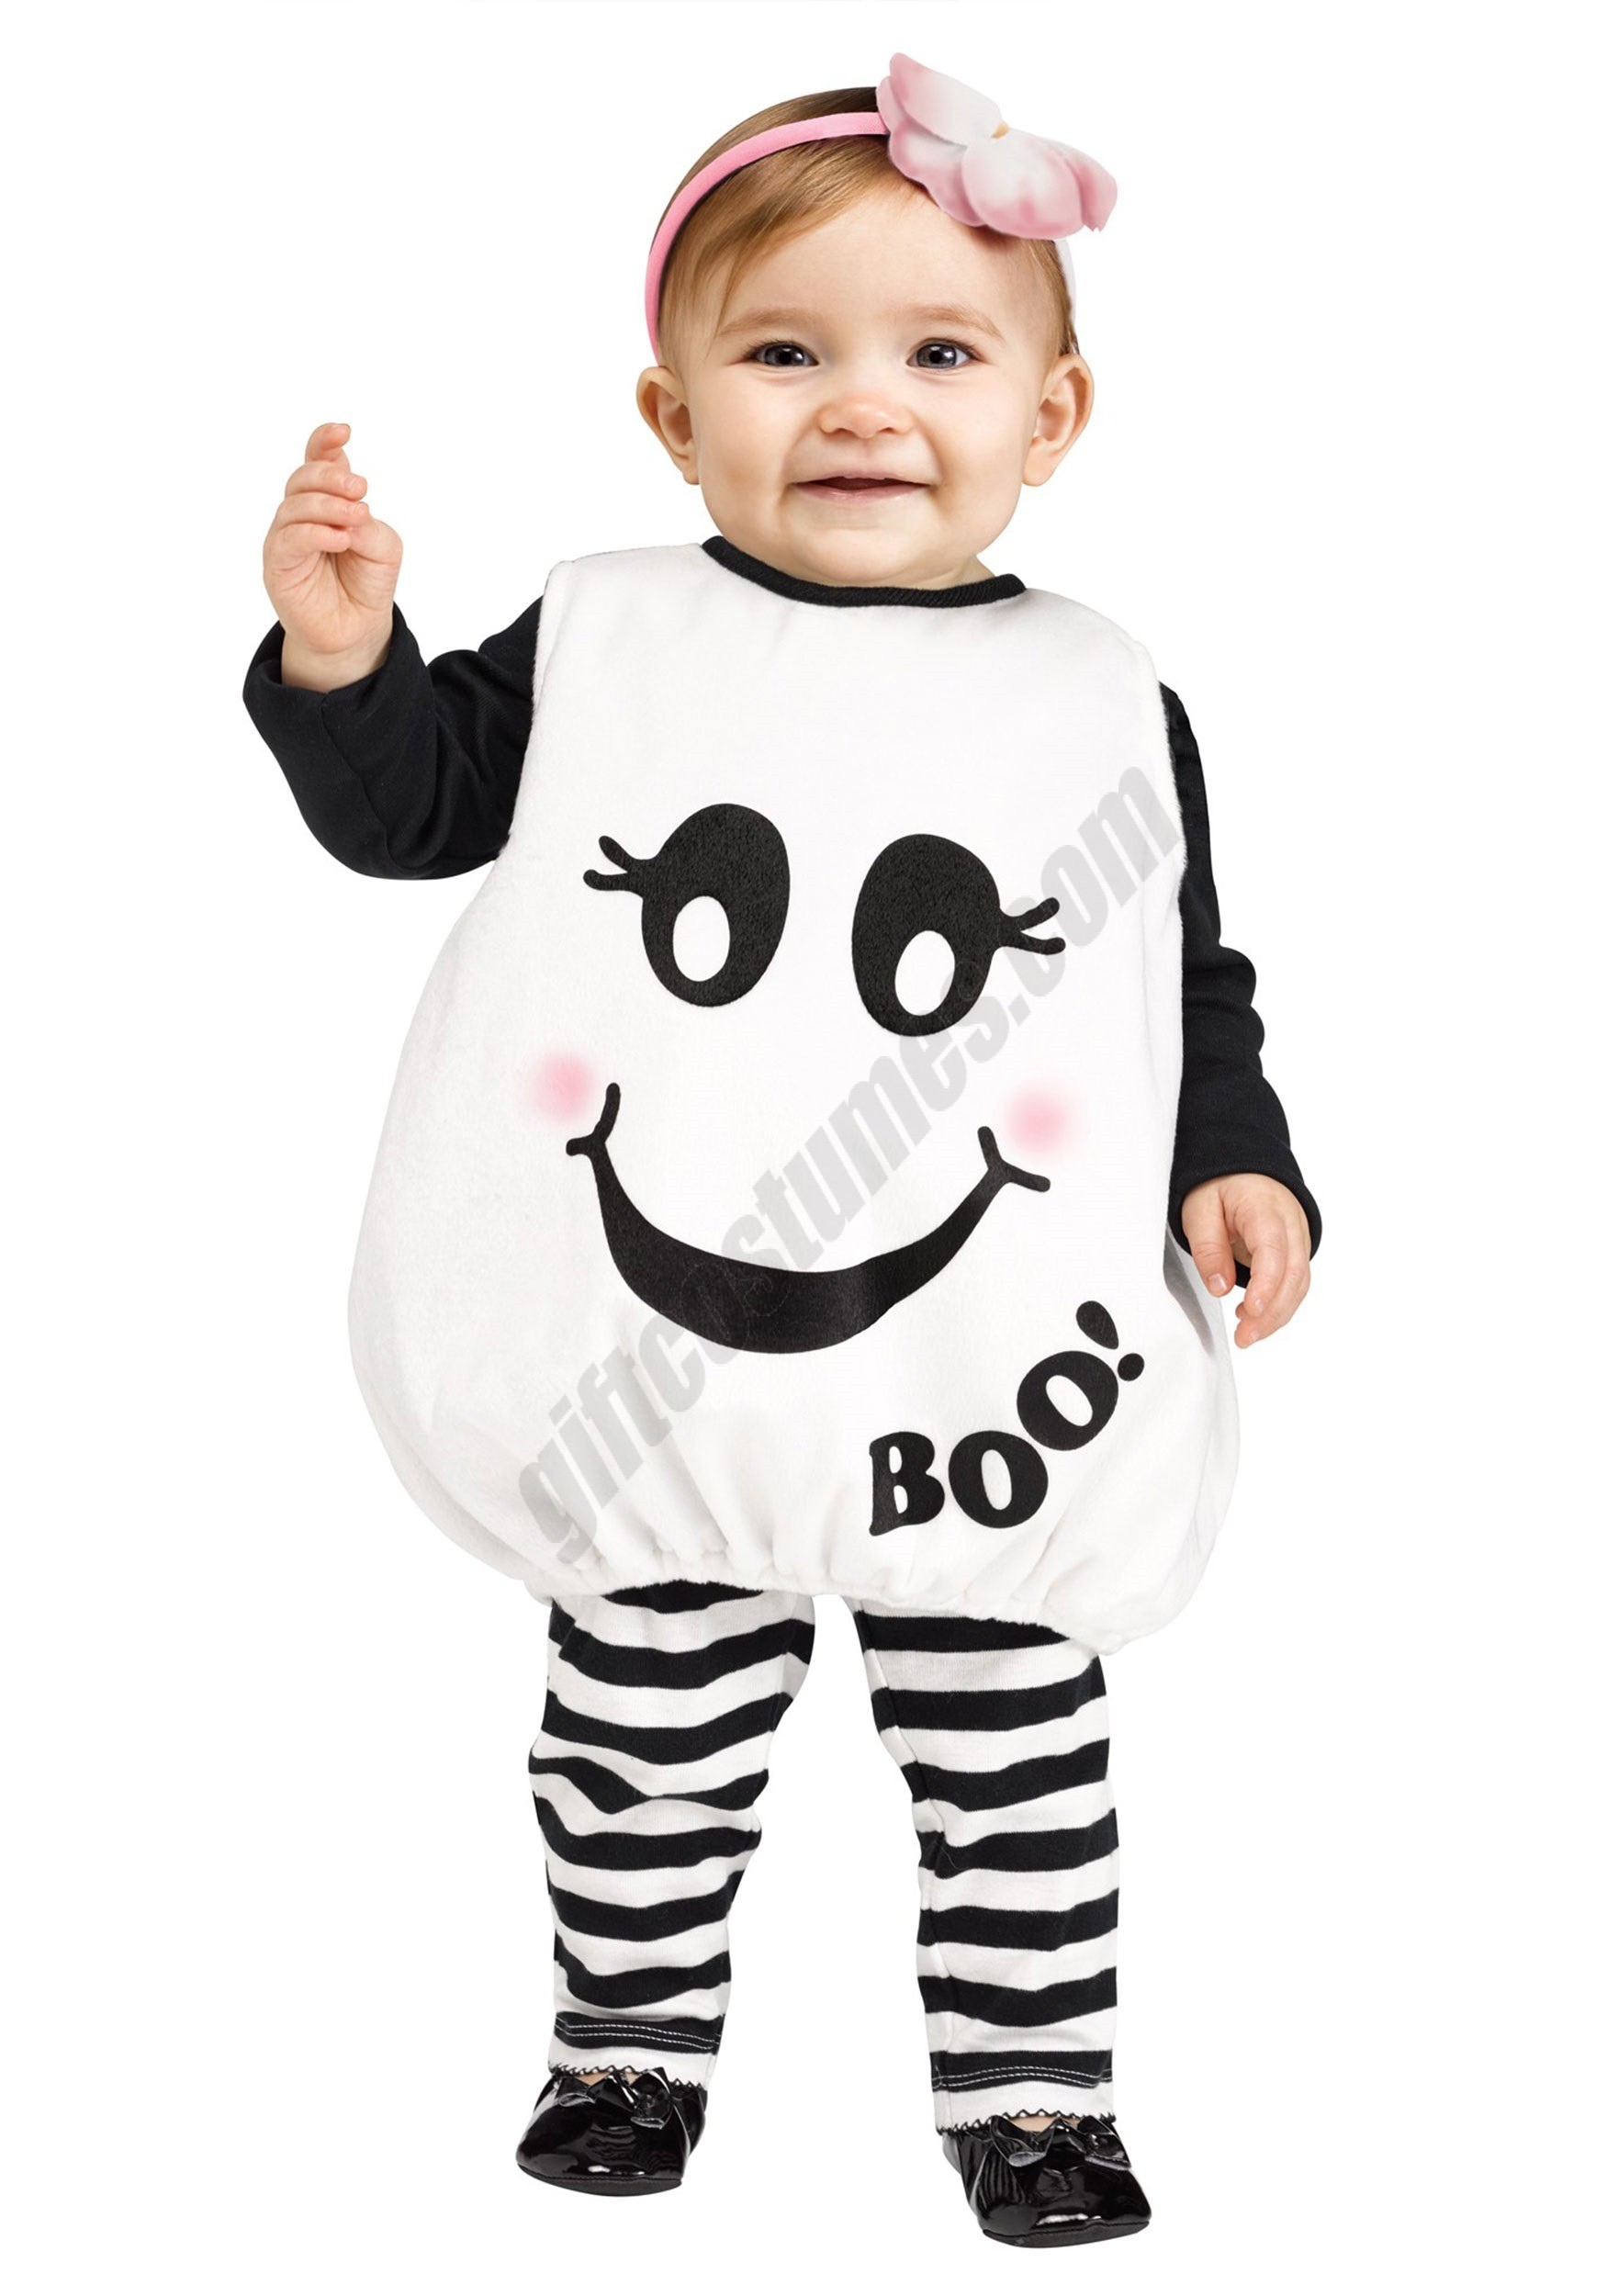 Baby Boo! Ghost Costume for Toddlers Promotions - Baby Boo! Ghost Costume for Toddlers Promotions